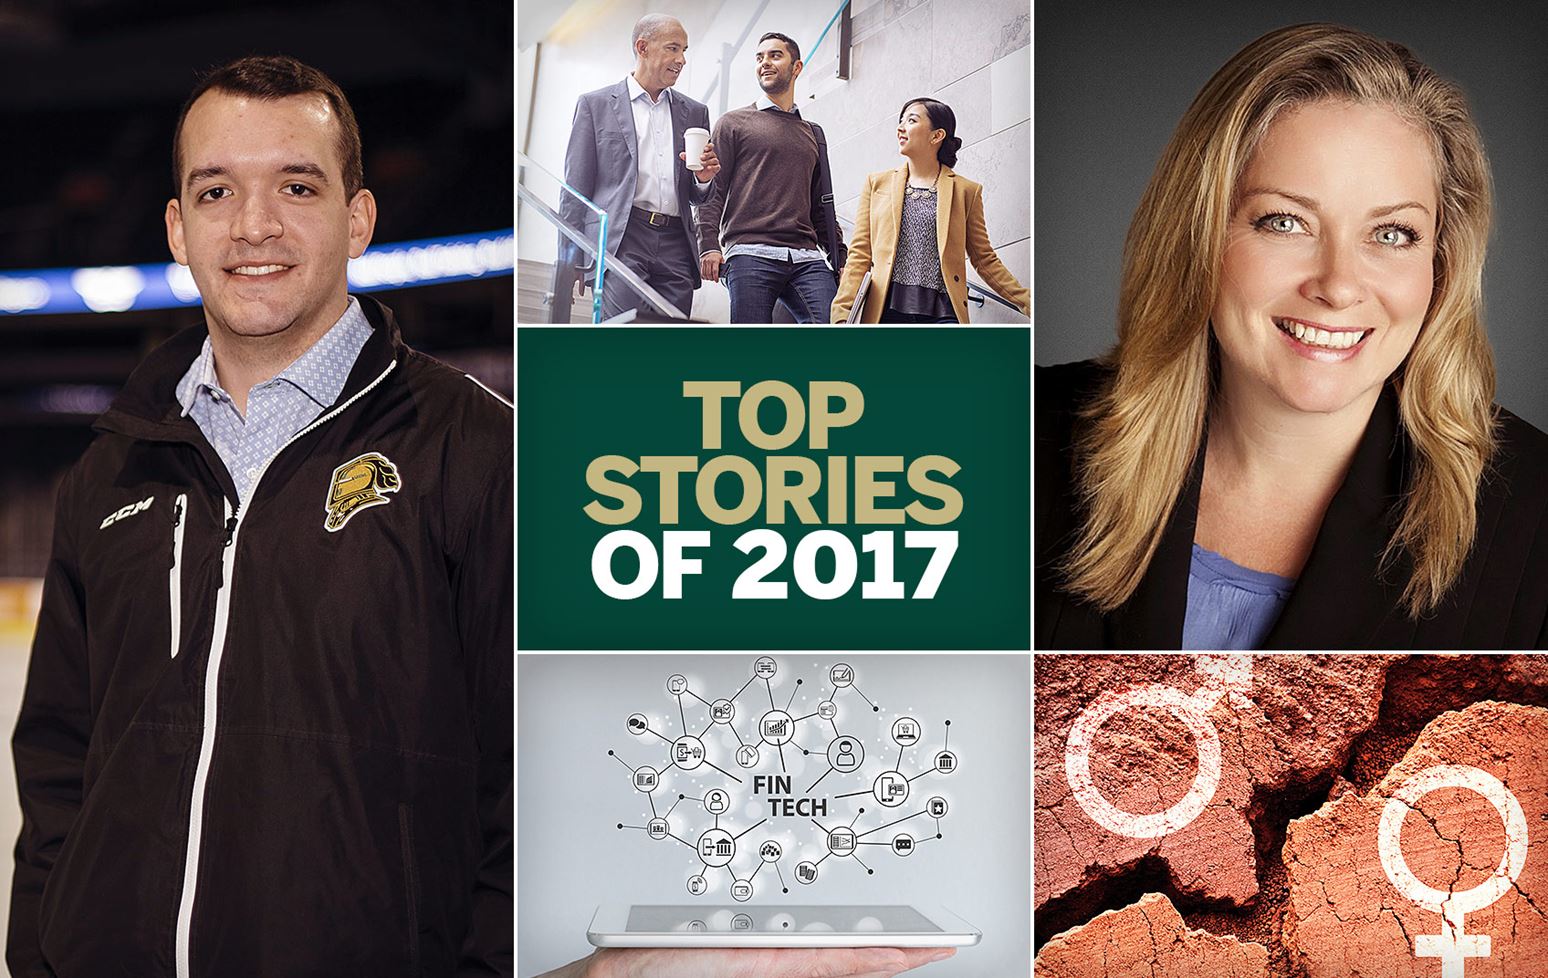 Top stories of 2017 photo collage